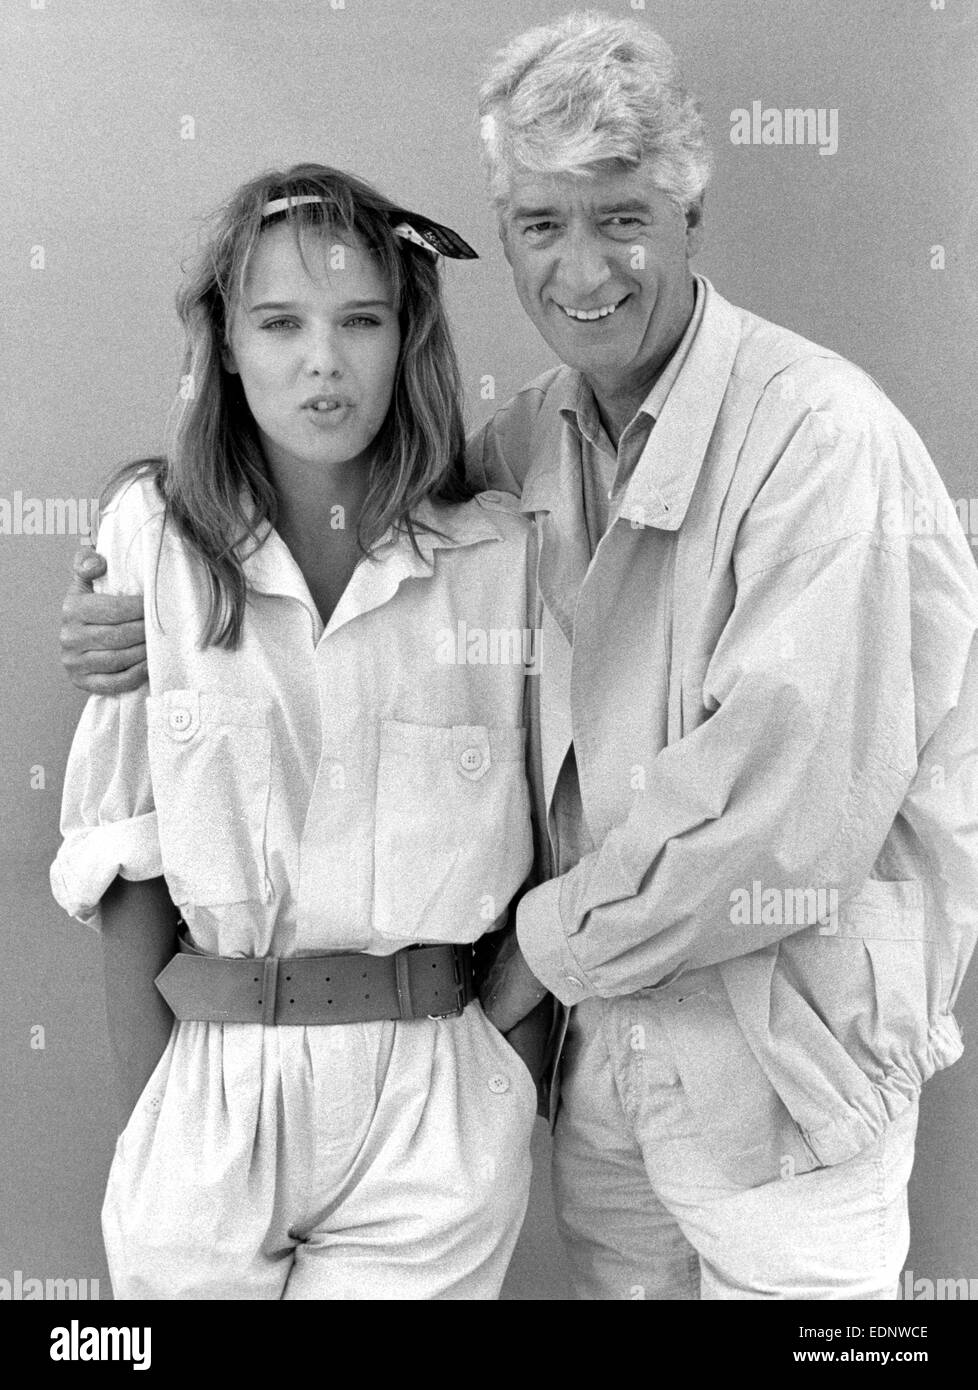 Show master Rudi Carrell and Desiree Nosbusch during the screening of 'Rudi's Tagesshow' in October 1985. Actress Desiree Nosbusch - also known as Desiree Becker - was born on 14 January 1965 in Esch in Luxembourg. Stock Photo